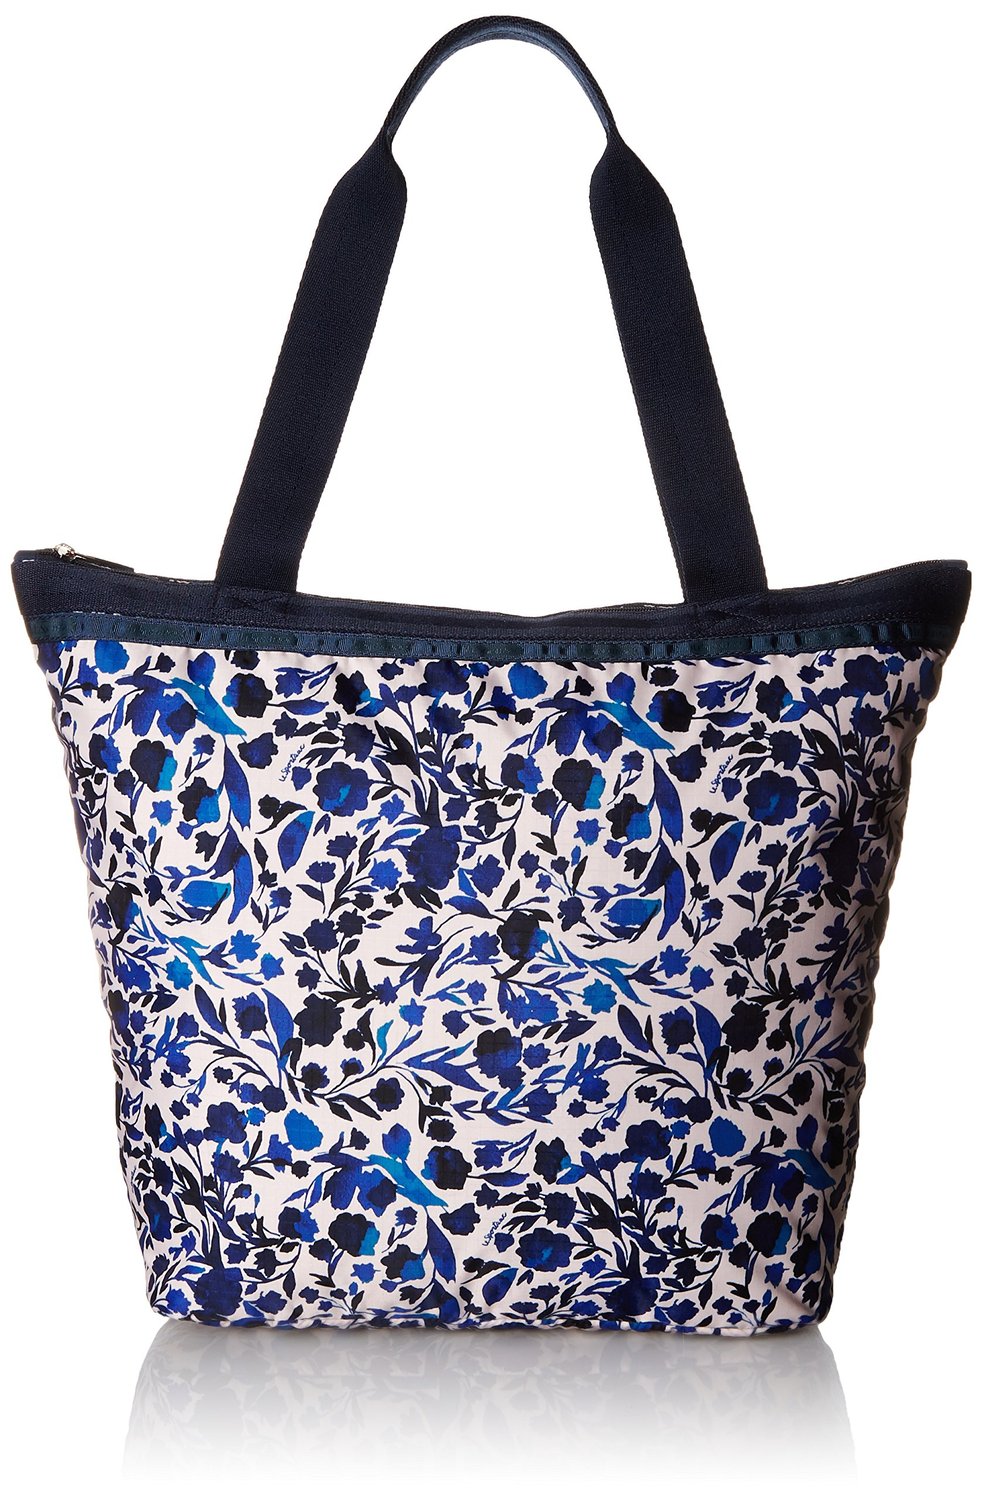 LeSportsac Hailey Tote – Luggage Online